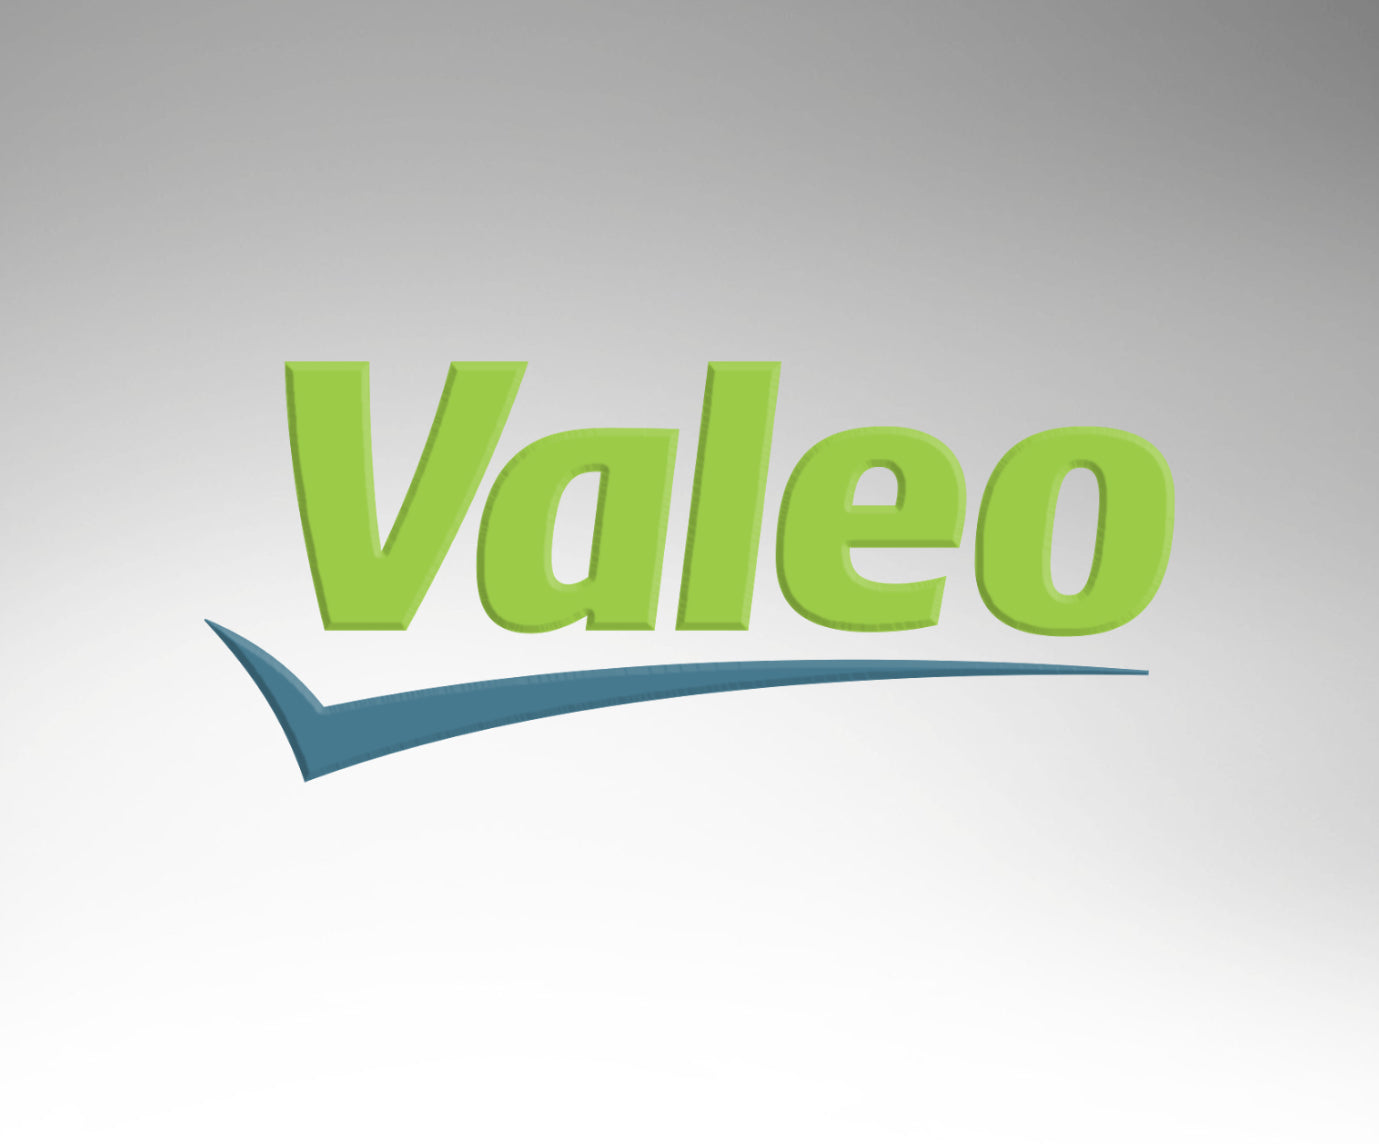 Dana And Valeo Collaborate To Supply Complete 48-Volt Electric Vehicle  Systems